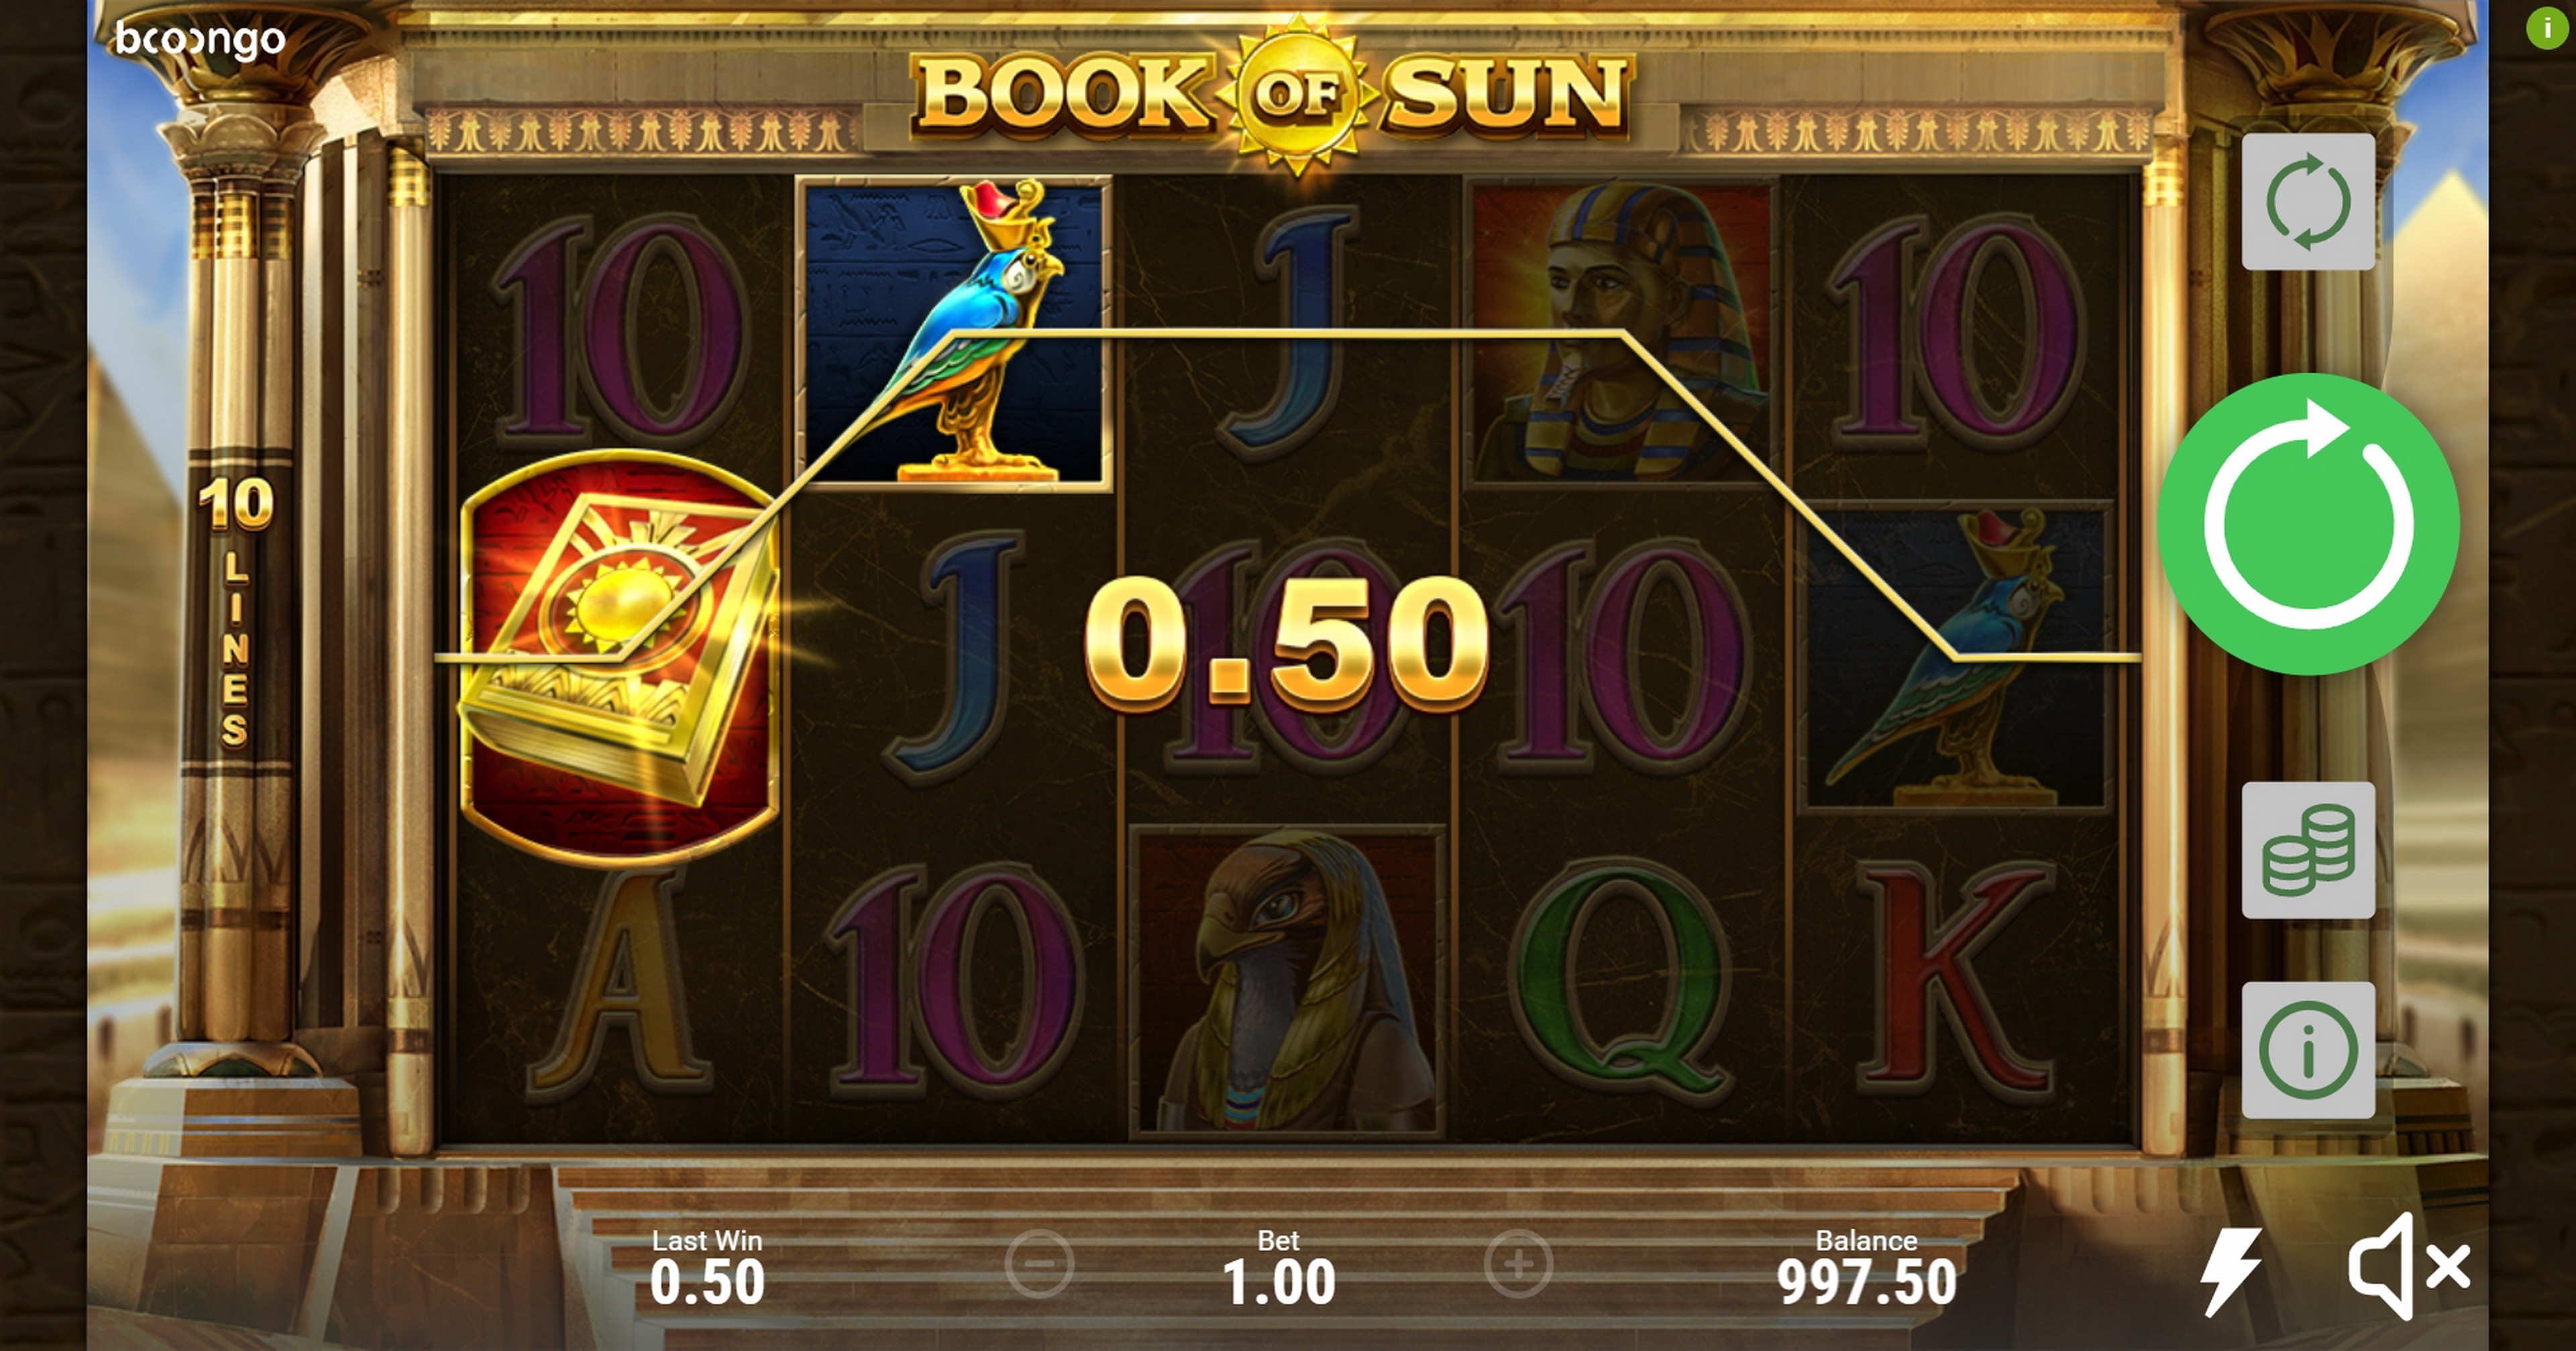 Win Money in Book of Sun Free Slot Game by Booongo Gaming